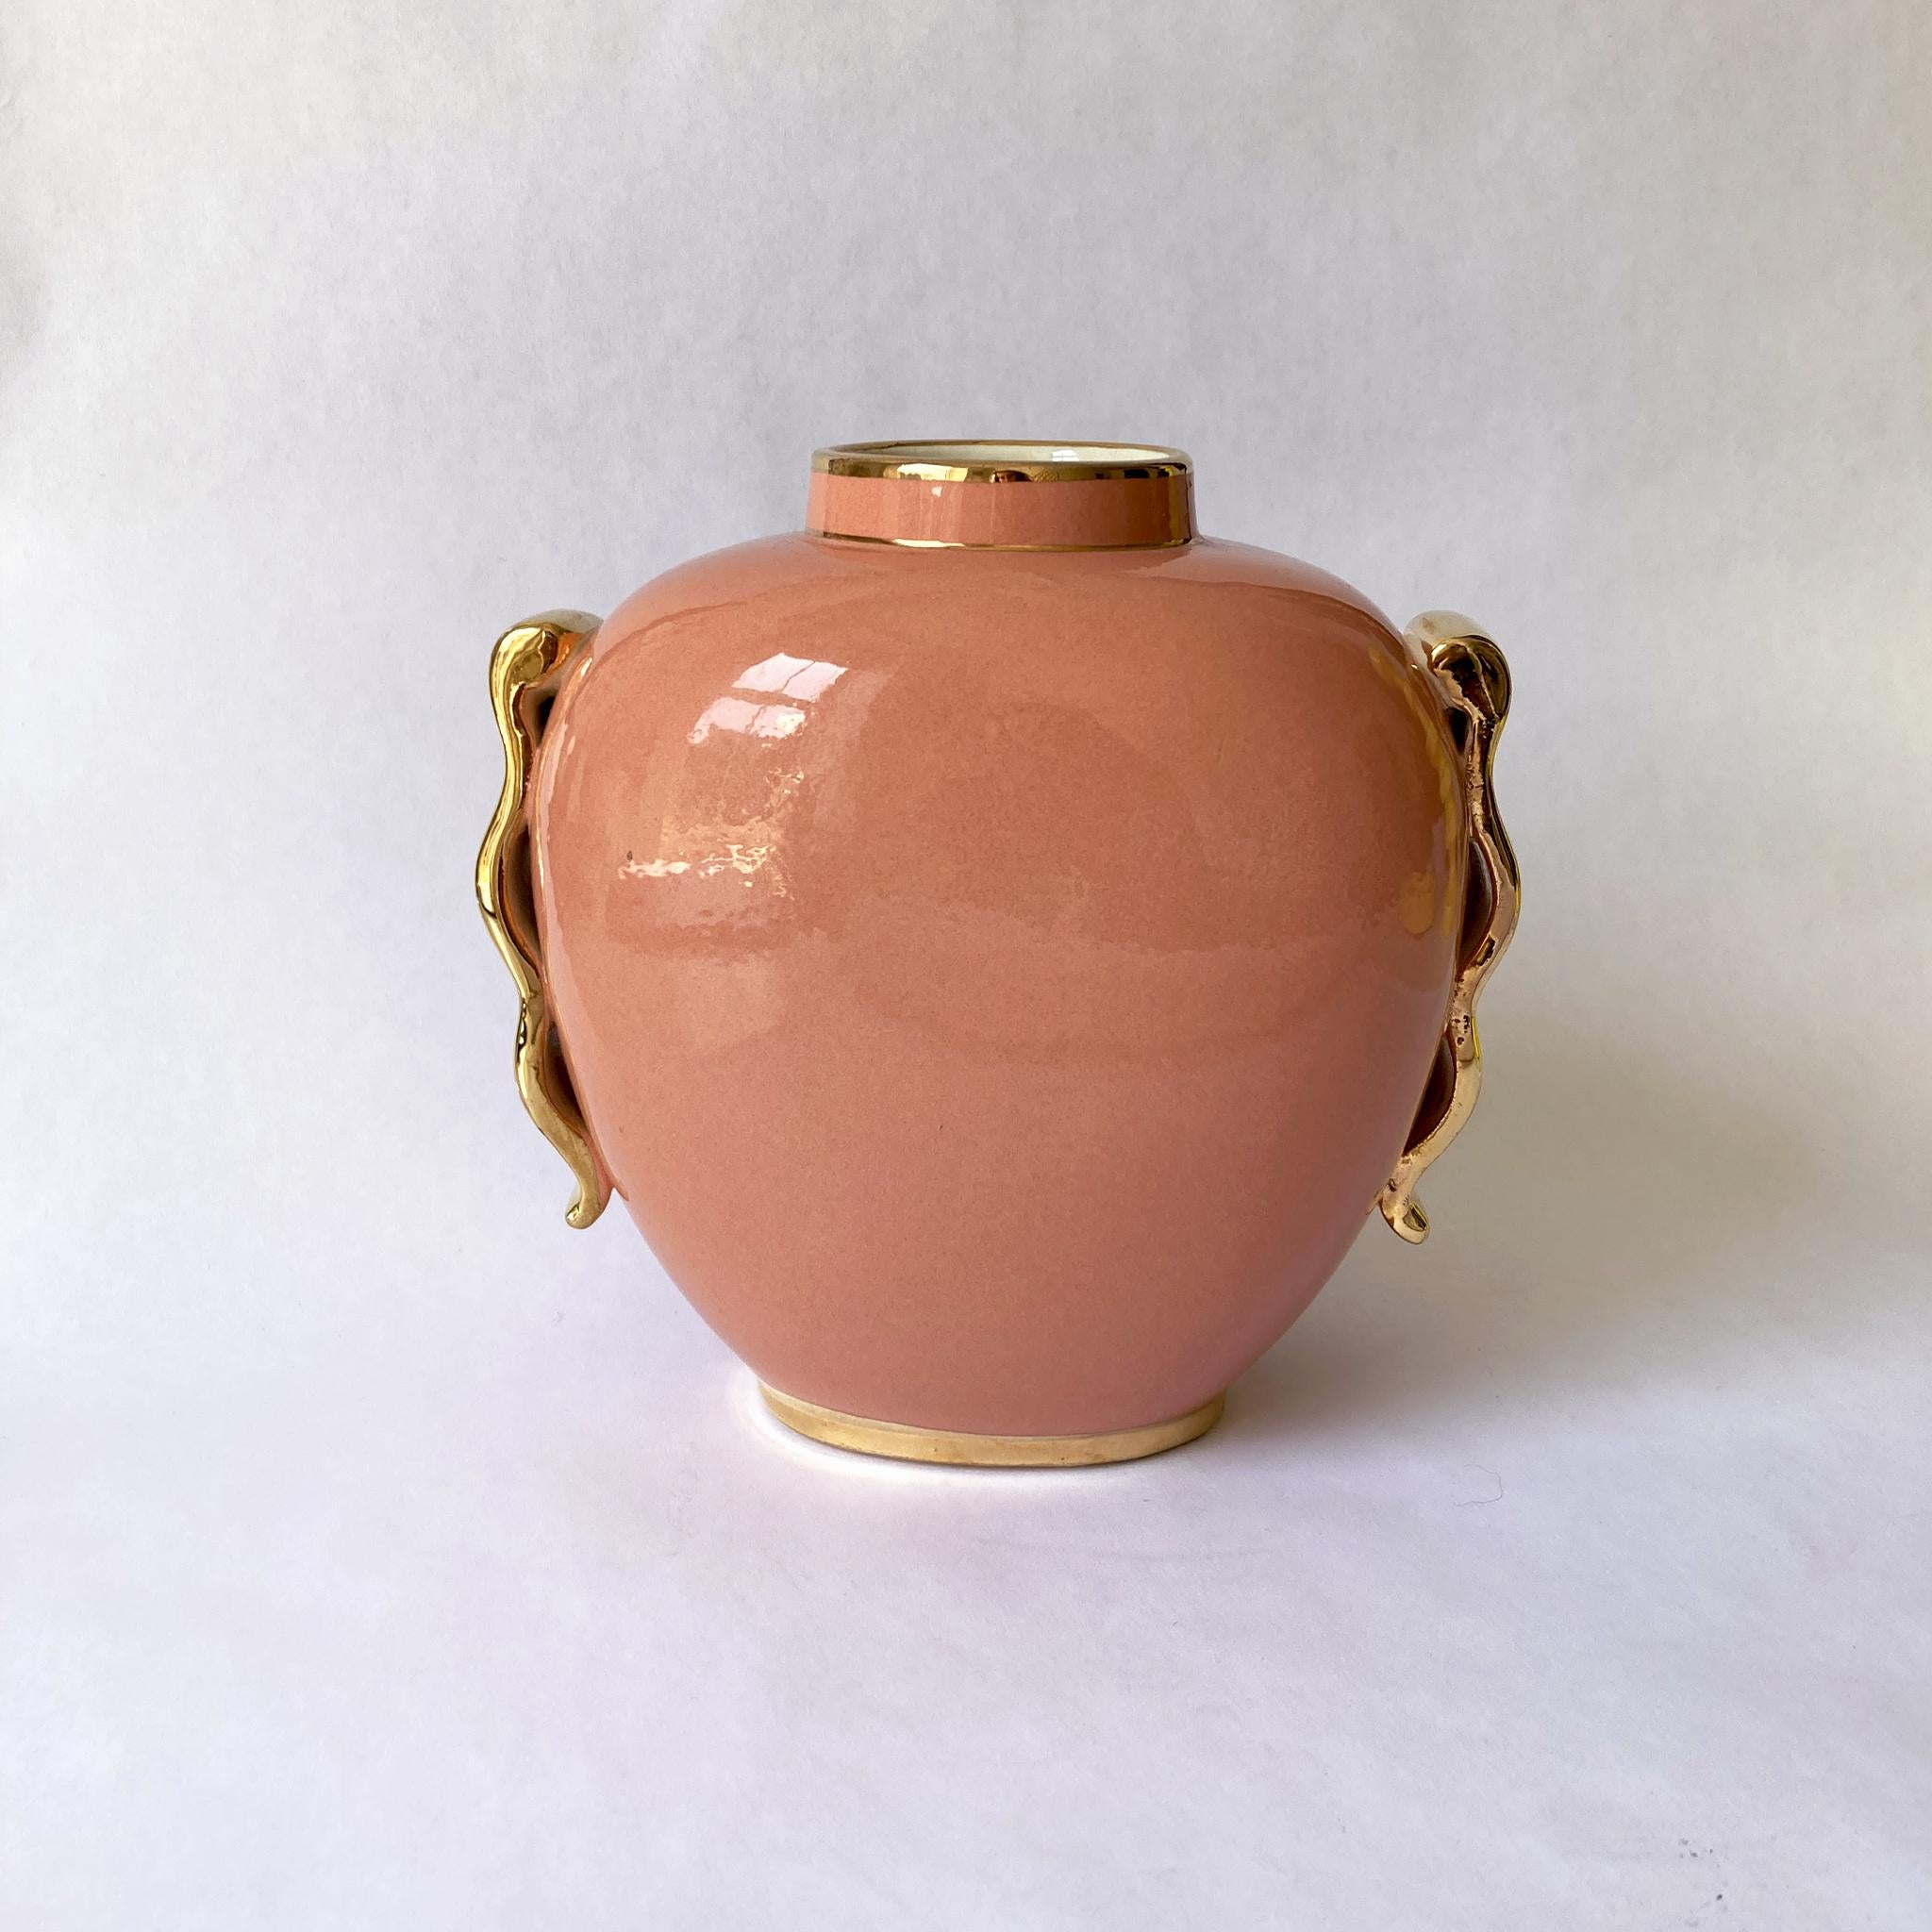 Oval Vase by Boch Frères La Louvière Belgium. Form 1291/0 designed by Raymond Chevallier around 1940. Monochrome Peach body with gold accents on handles and at rim and base. A charming art deco vase. See condition details.

Measures: 
H 6.5